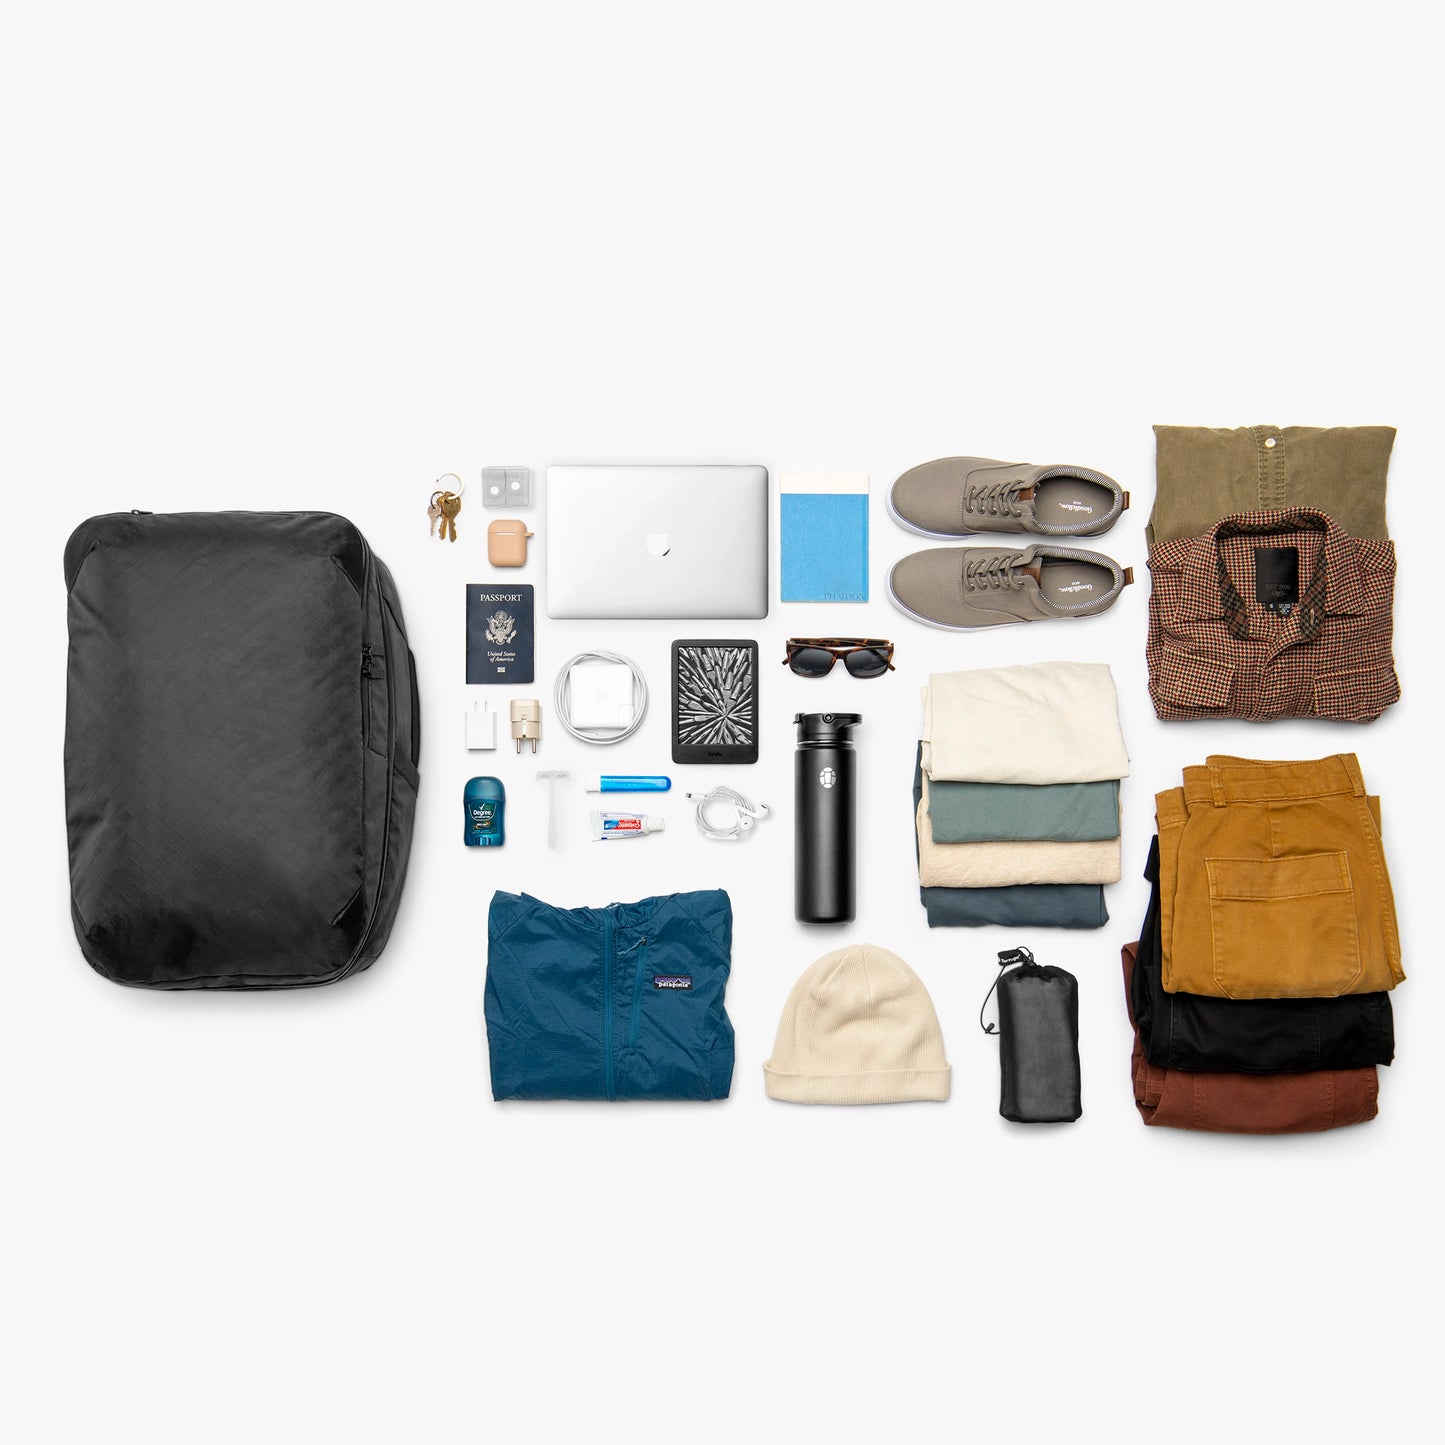 Pack everything you need for a week or more